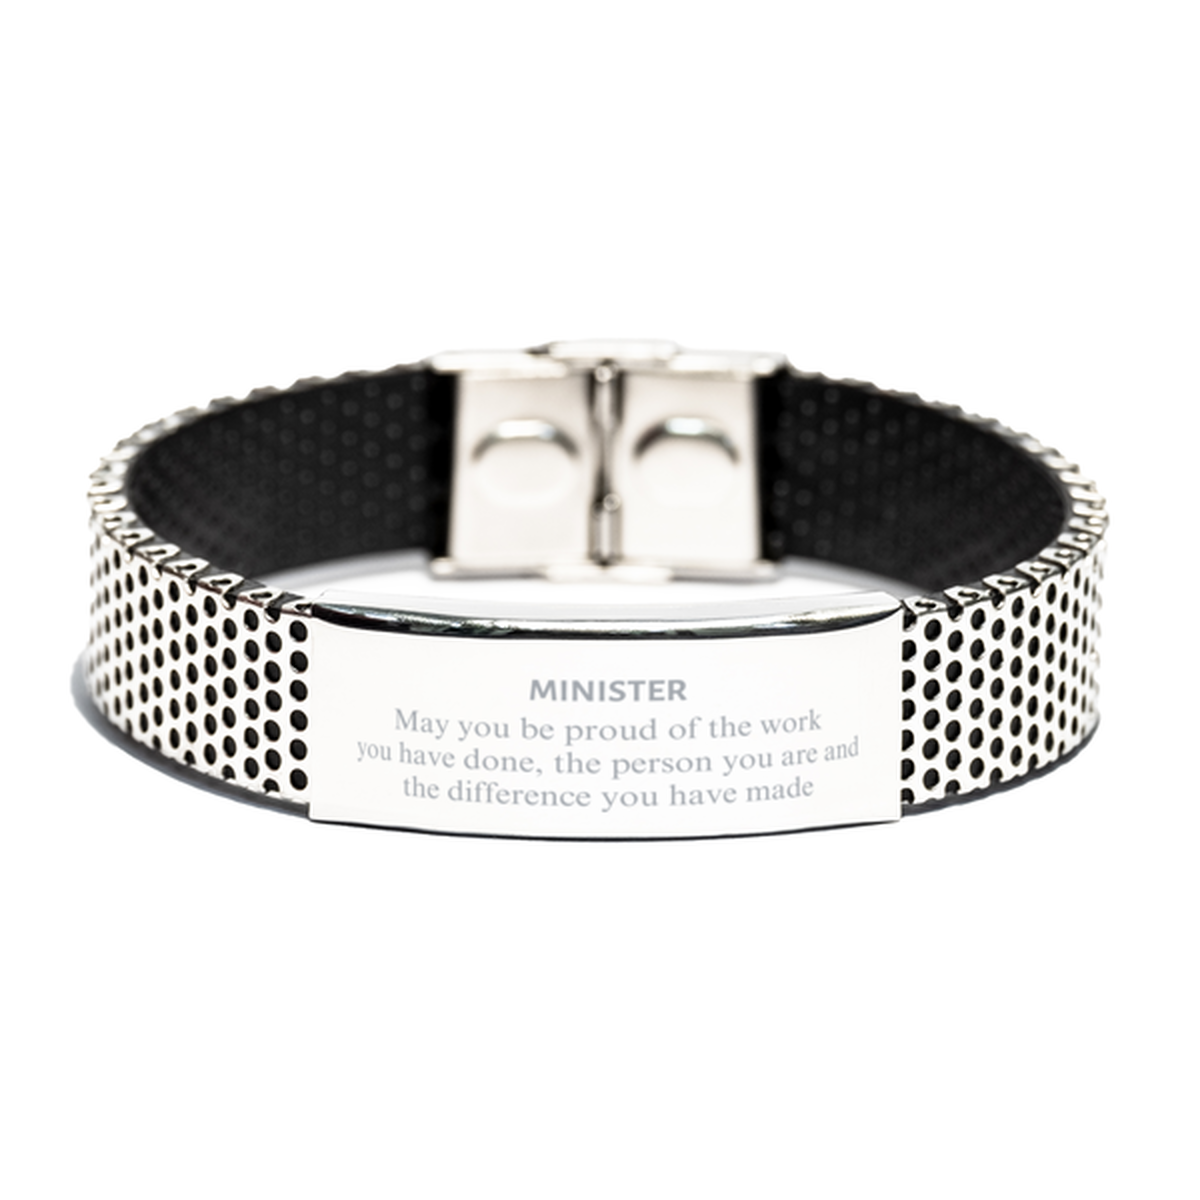 Minister May you be proud of the work you have done, Retirement Minister Stainless Steel Bracelet for Colleague Appreciation Gifts Amazing for Minister